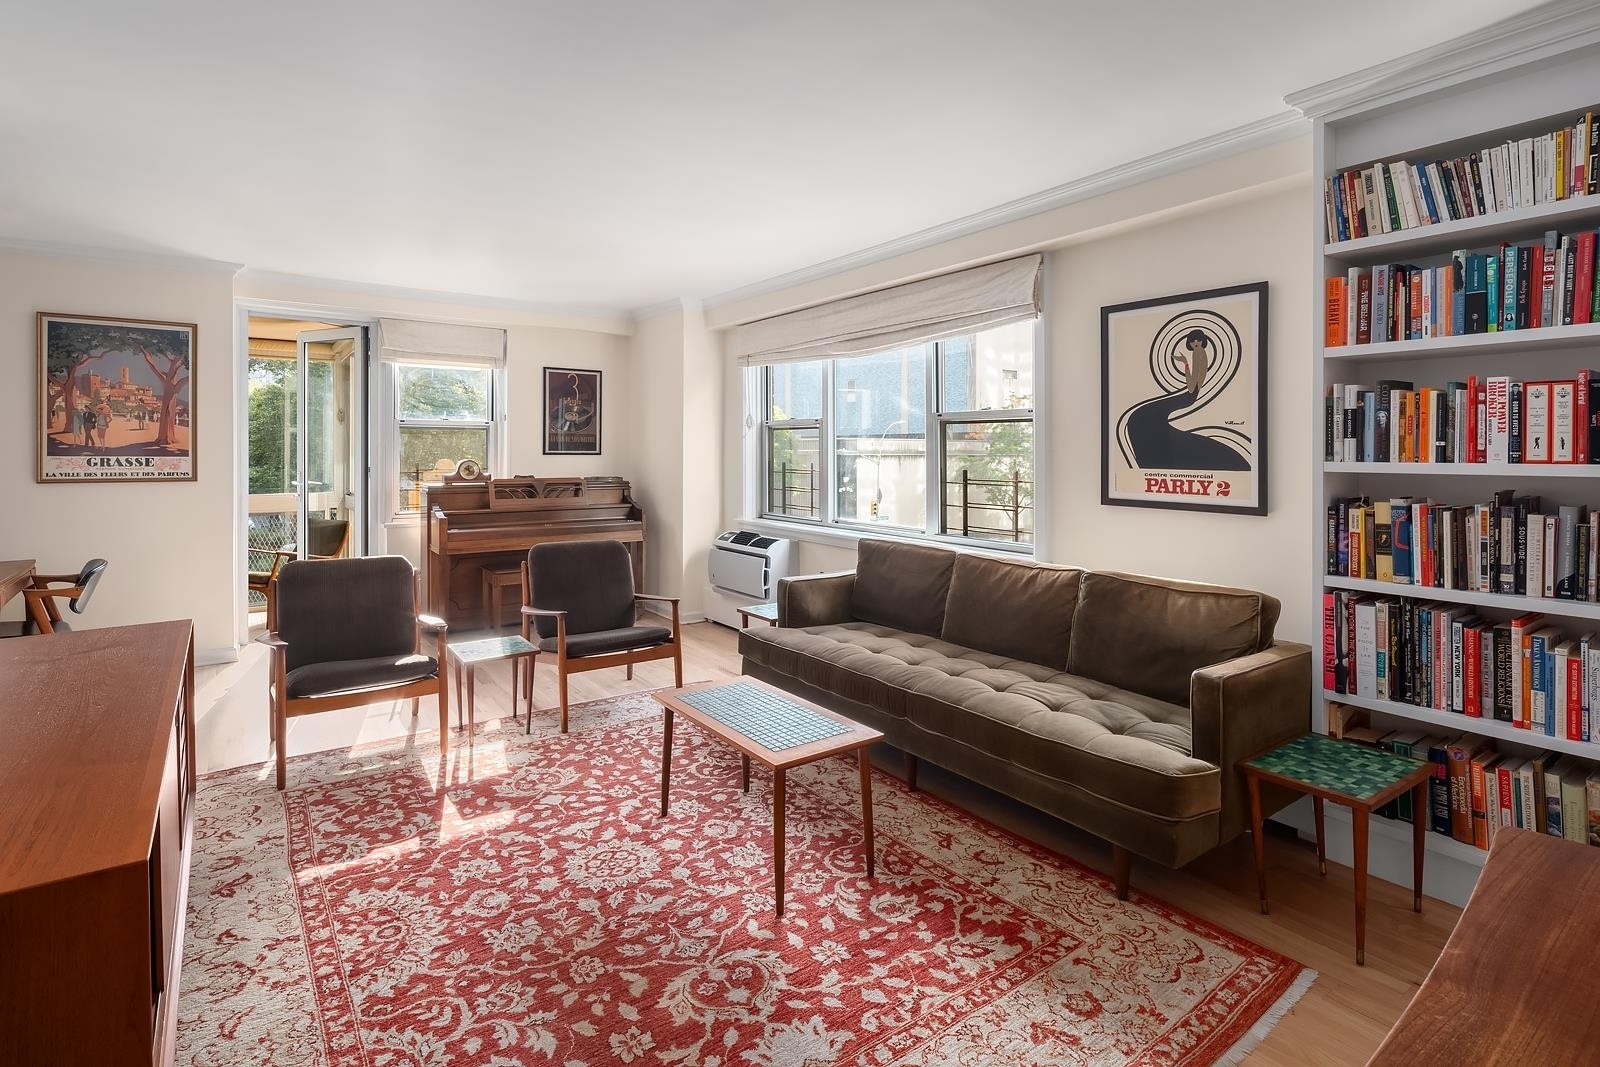 Co-op Properties for Sale at Lincoln Guild, 303 W 66TH ST, 3EE Lincoln Square, New York, New York 10069